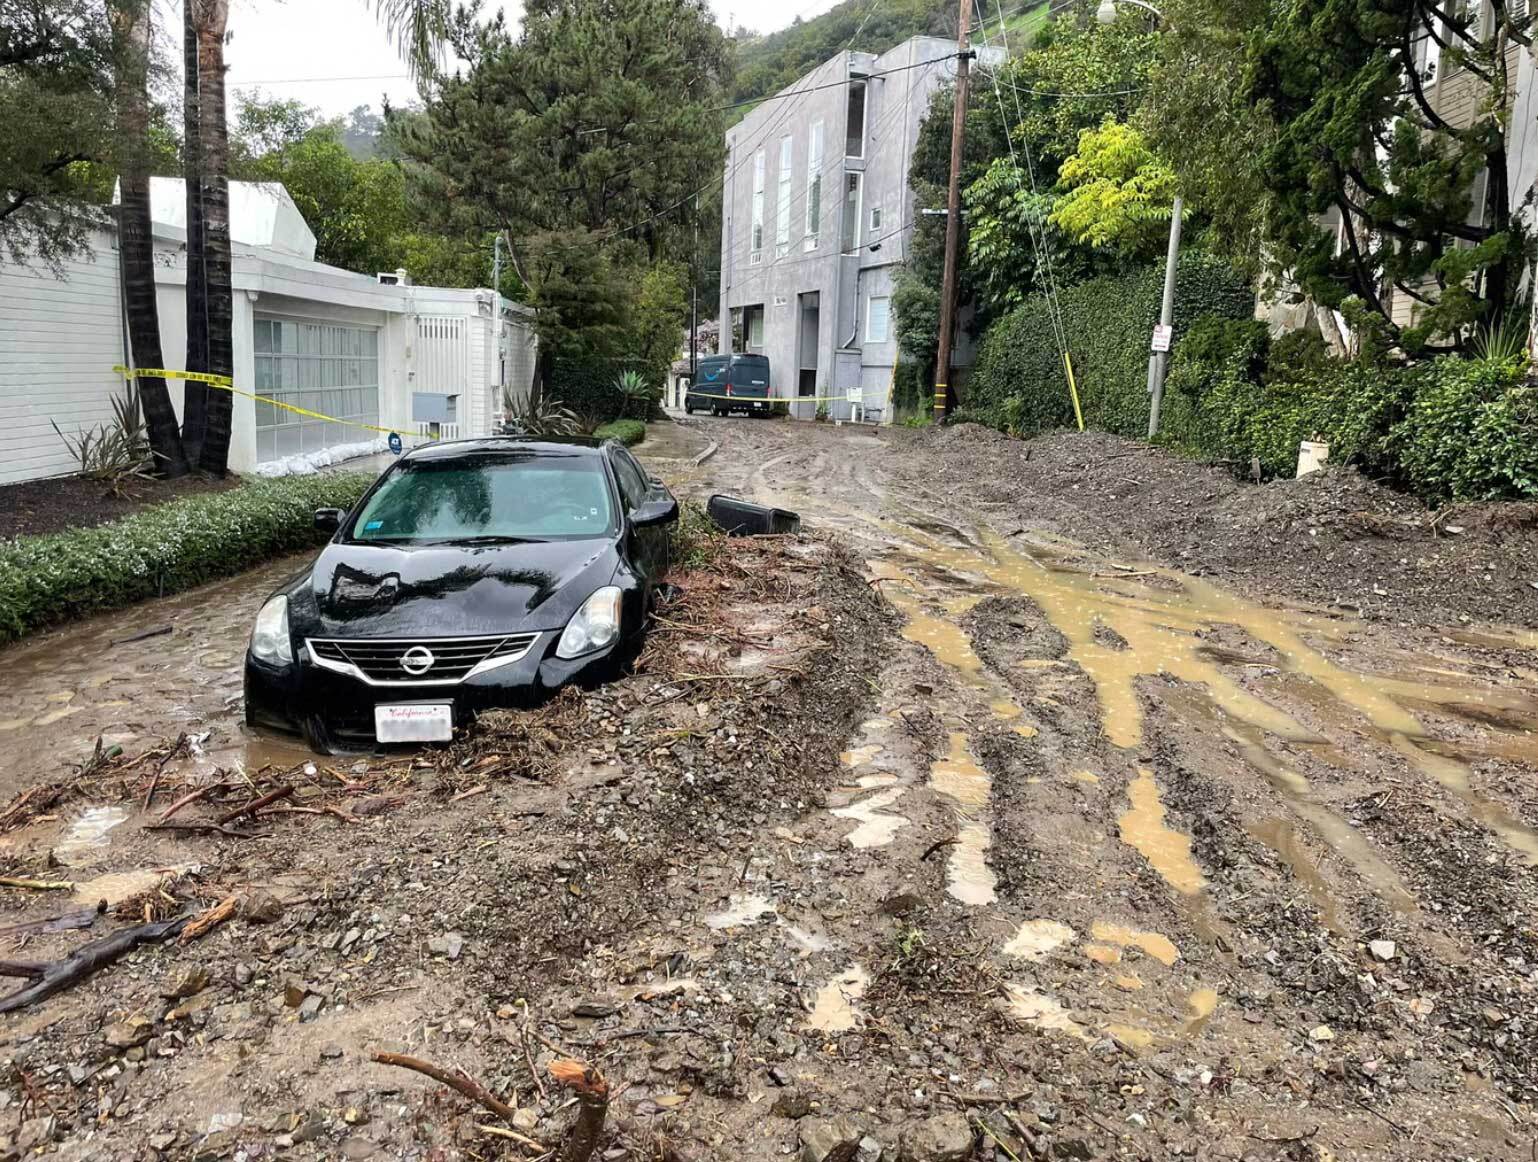 A car is half submerged in mud in the Beverly Crest neighbourhood of Los Angeles